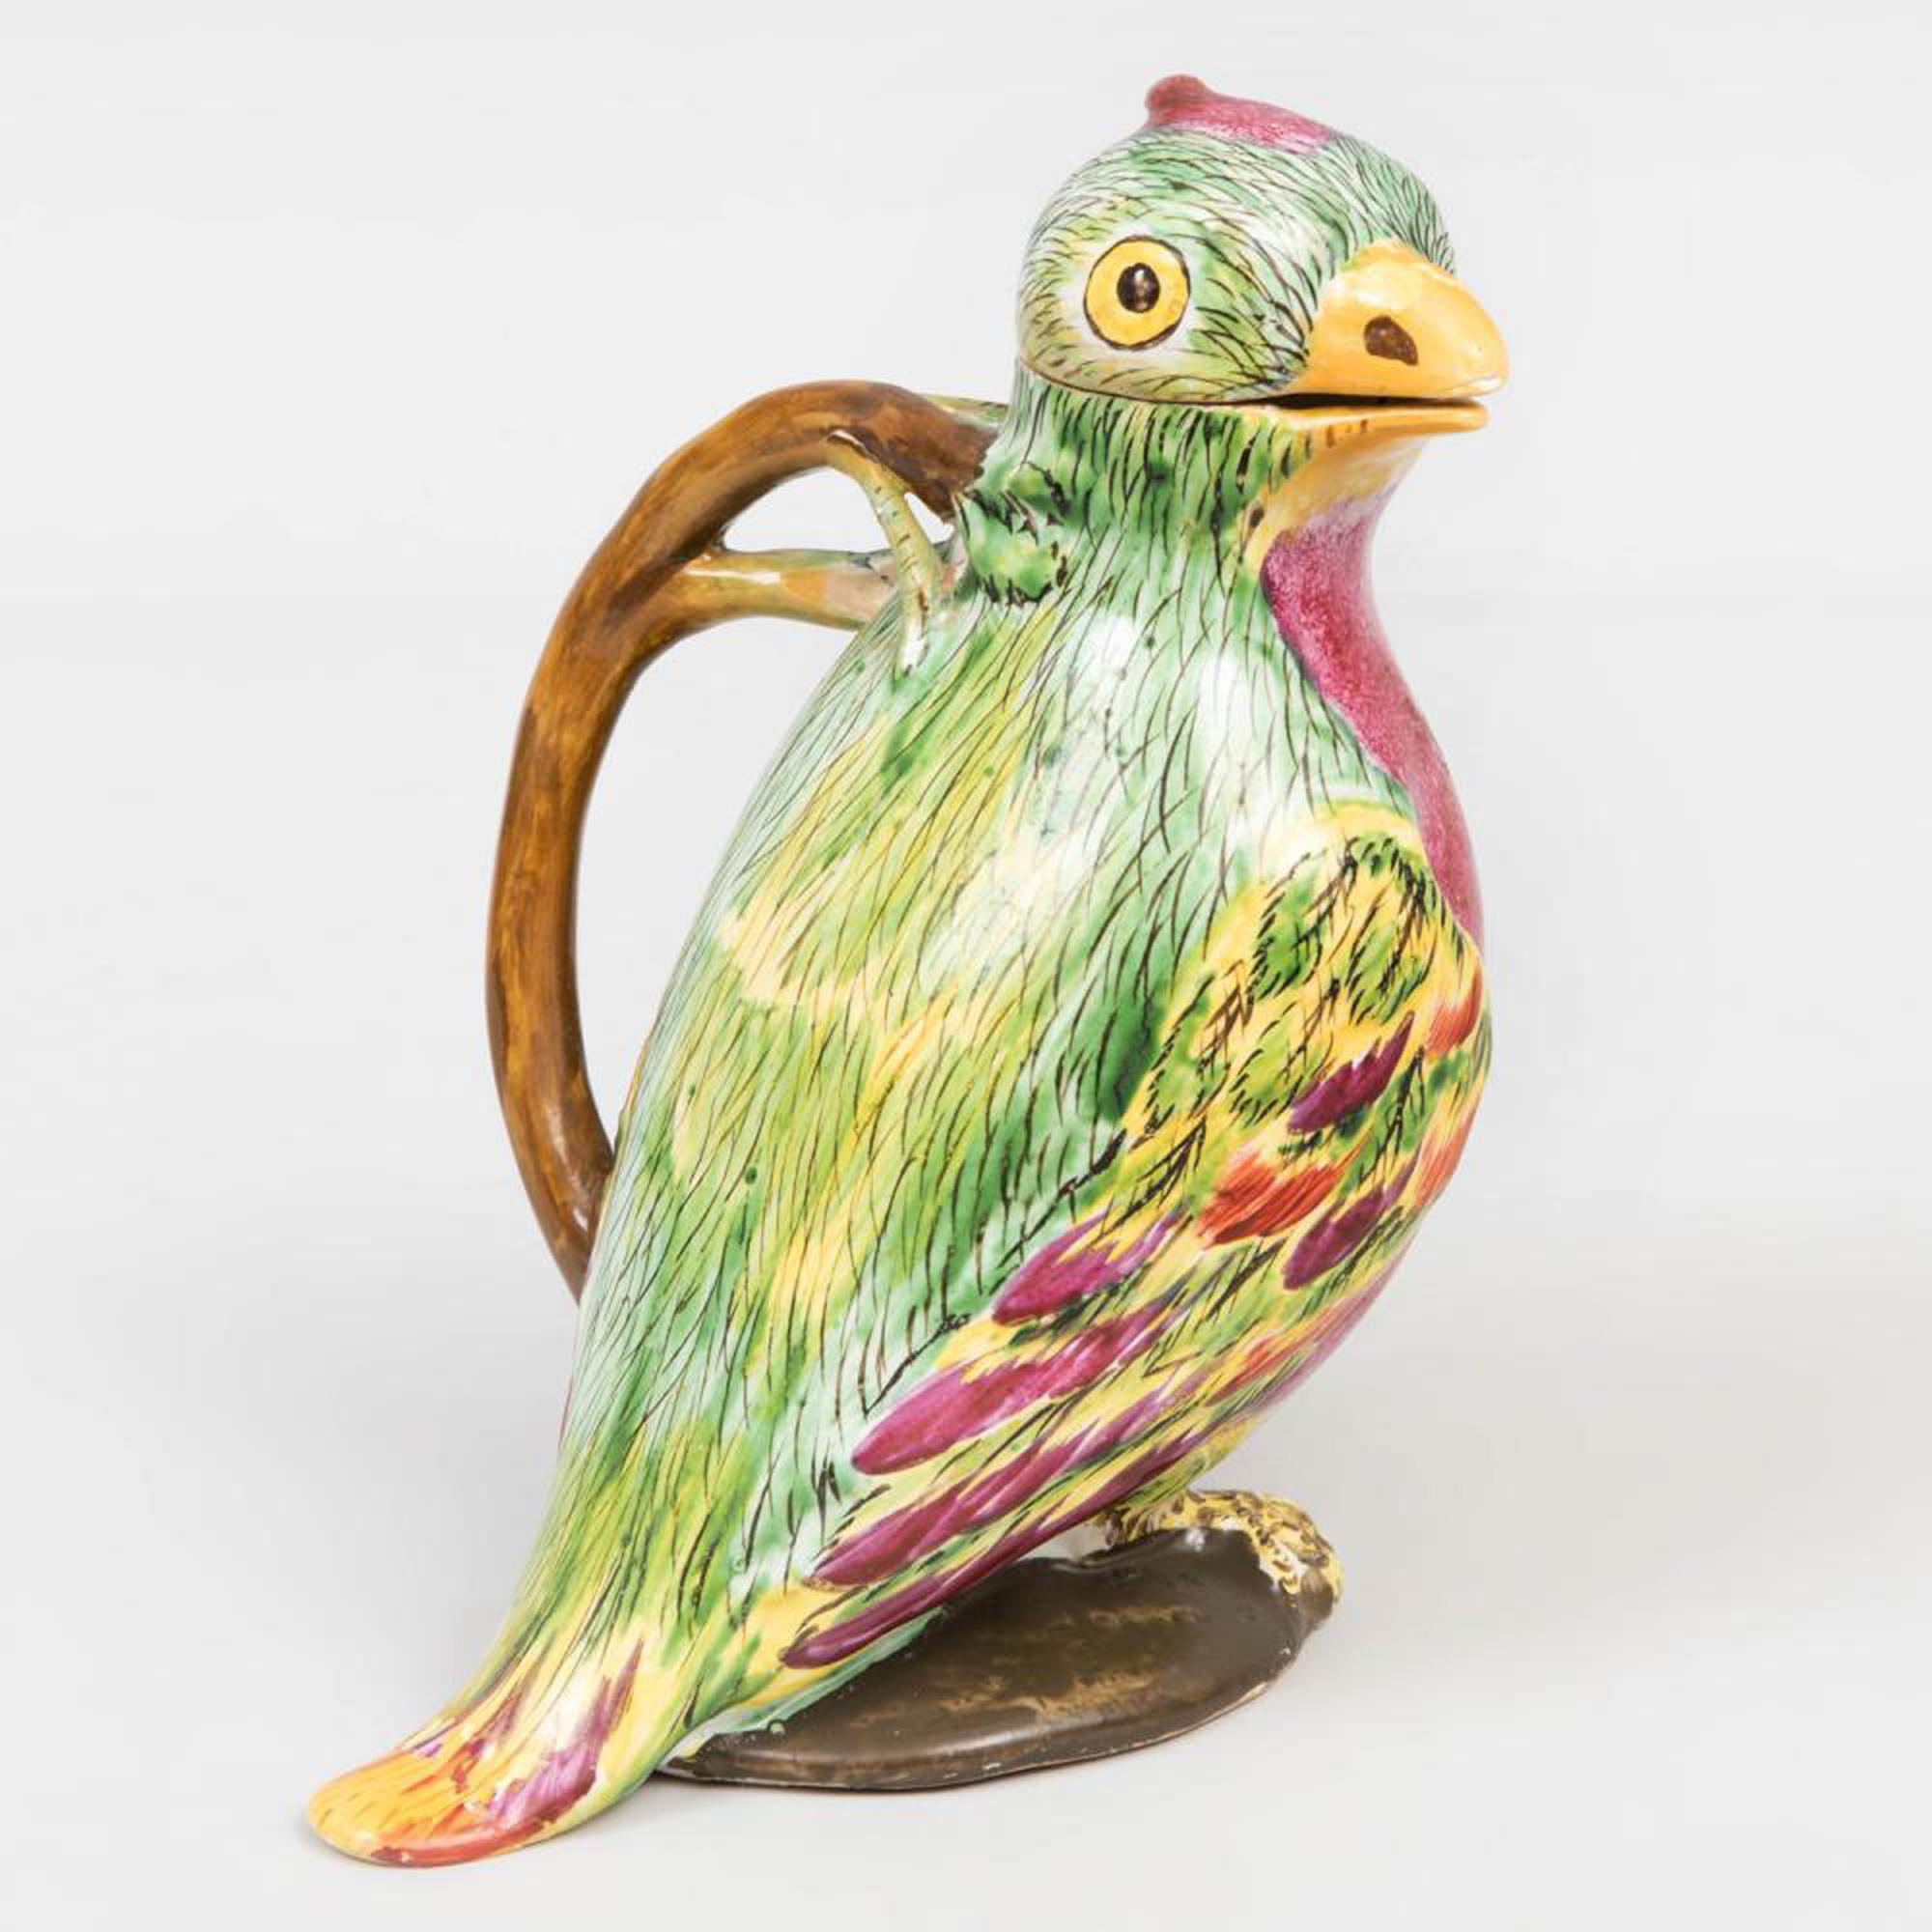 Proskau Faience Tompe L'oeil Jug in the form of a Parrot,
Circa 1770.

  The European tin-glazed earthenware tromp l'oeil jug is in the form of a parrot with a removable head forming the cover.  The parrot was made in what is now Poland at Proskau.